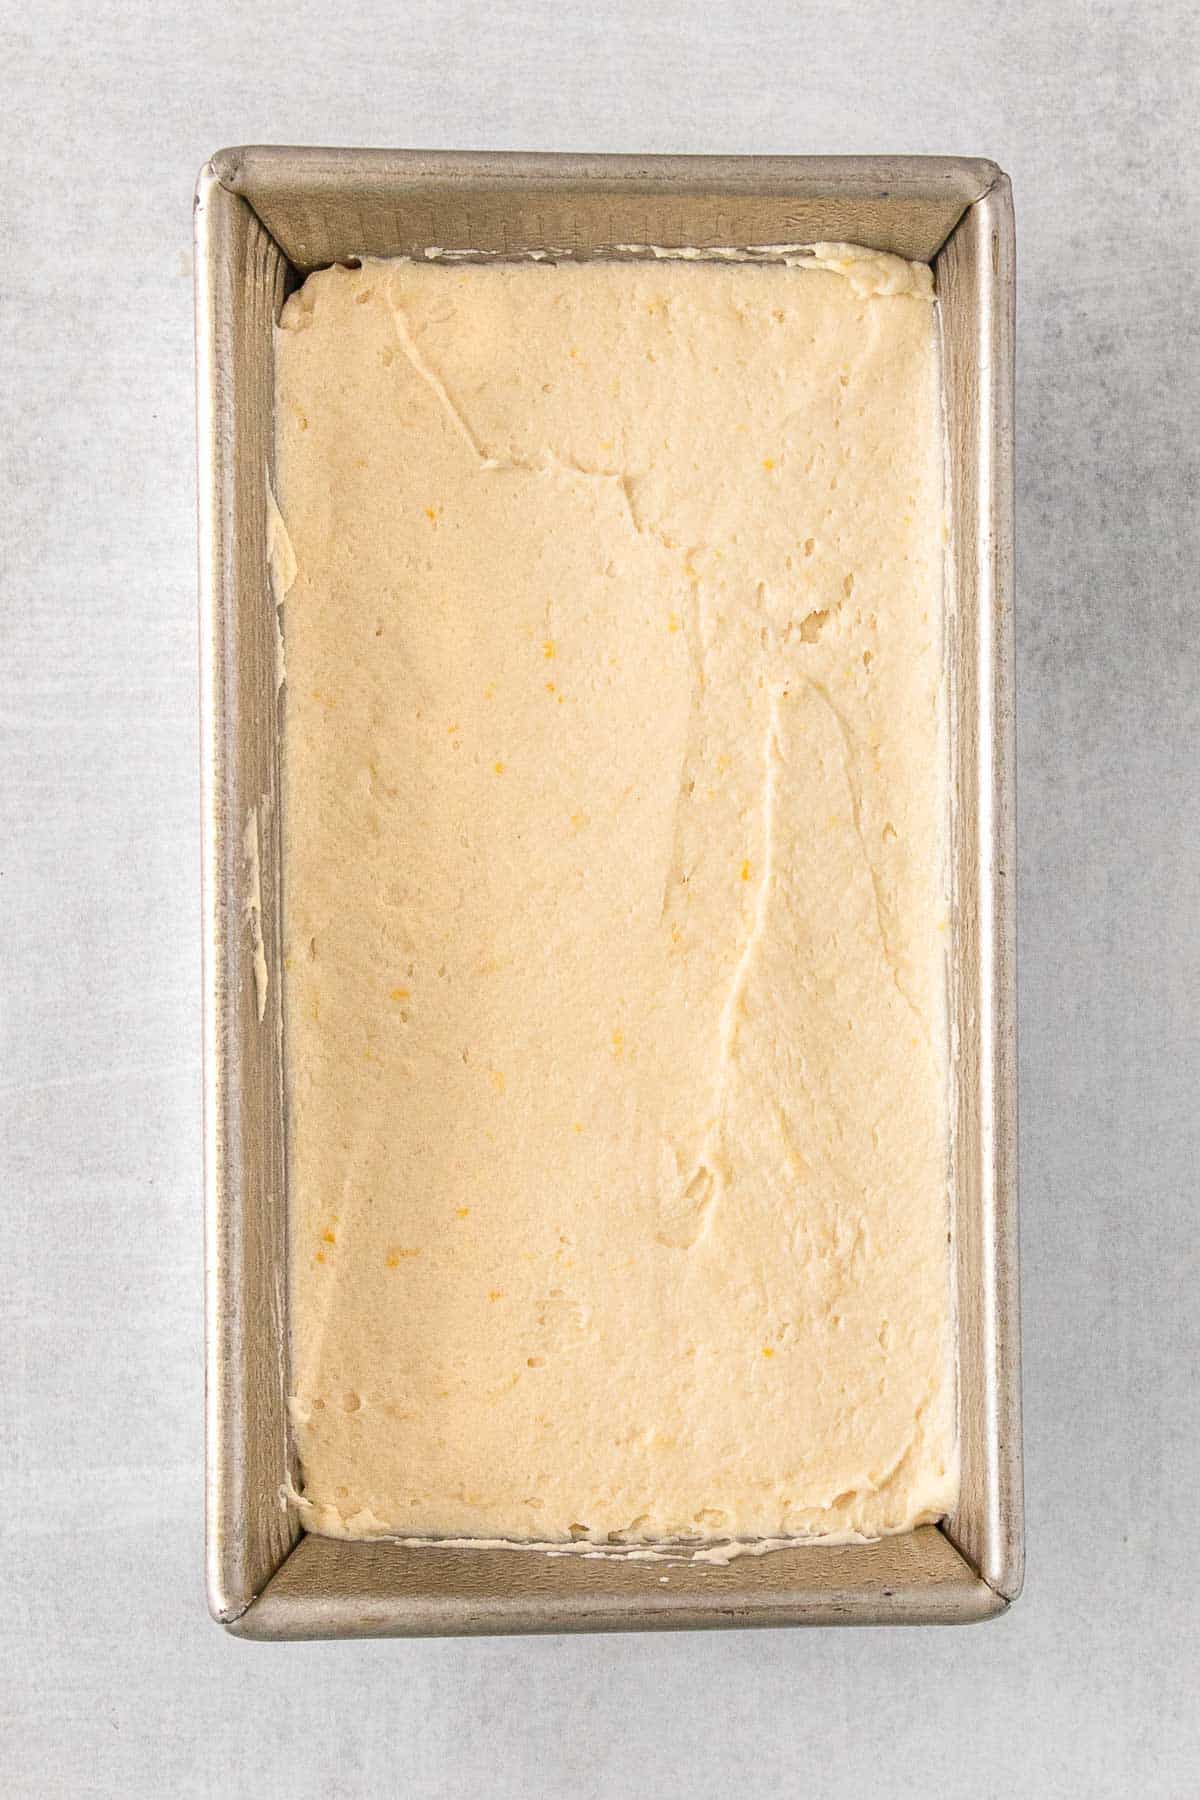 Metal loaf pan with lemon pound cake batter spread in.